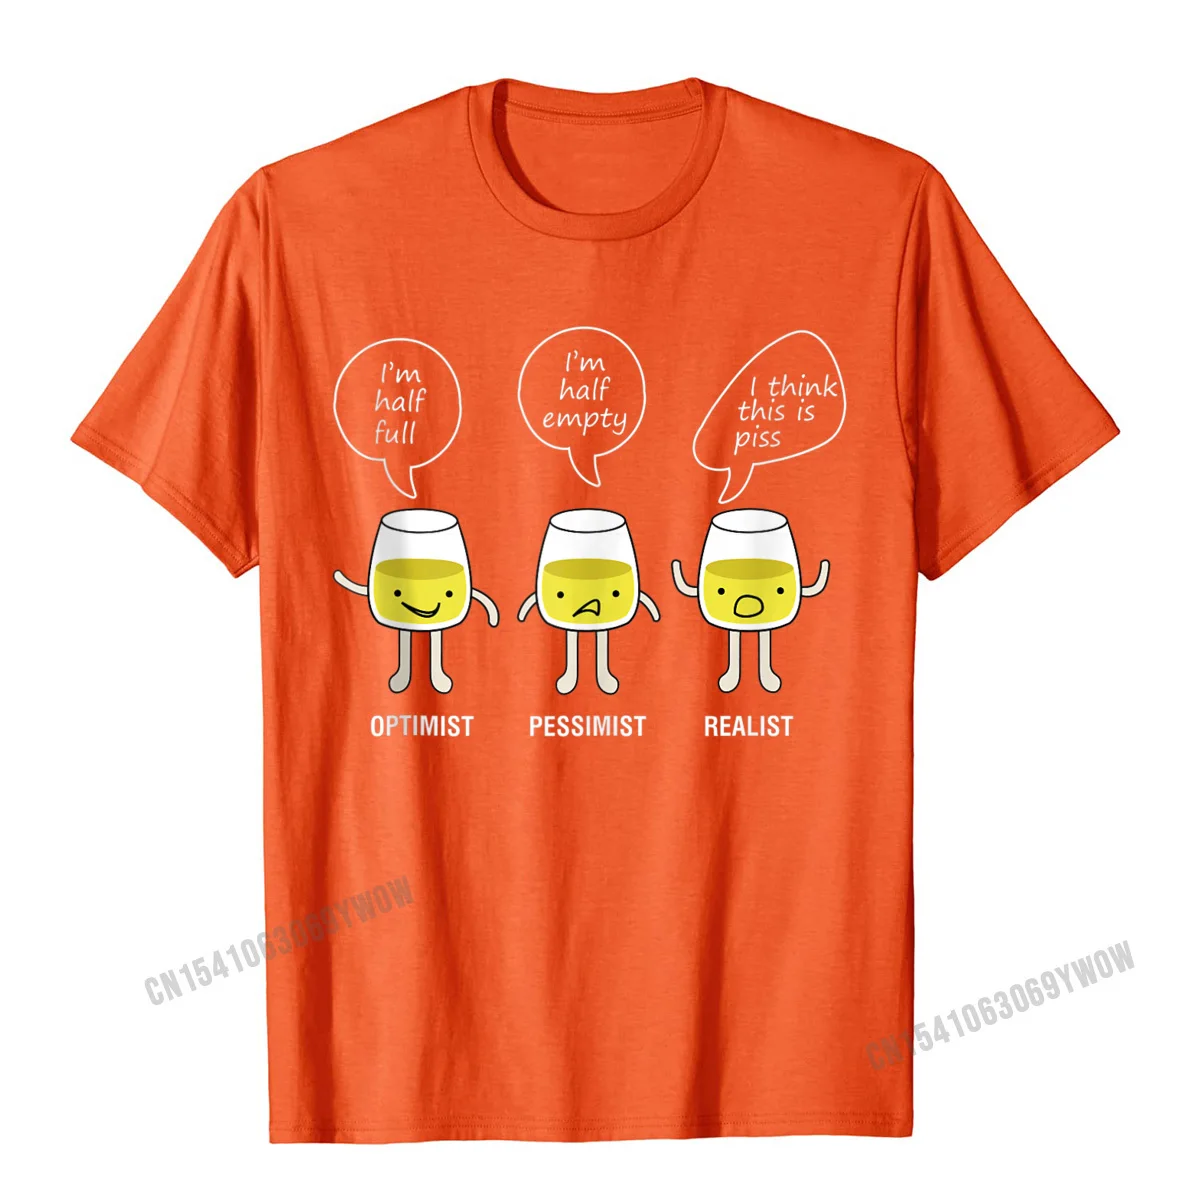 Birthday Printed On O-Neck Top T-shirts Thanksgiving Day Tops Shirt Short Sleeve for Men 2021 Discount 100% Cotton T-shirts Realist Sarcastic Funny Offensive Adult Humor Graphic Tank Top__694 orange